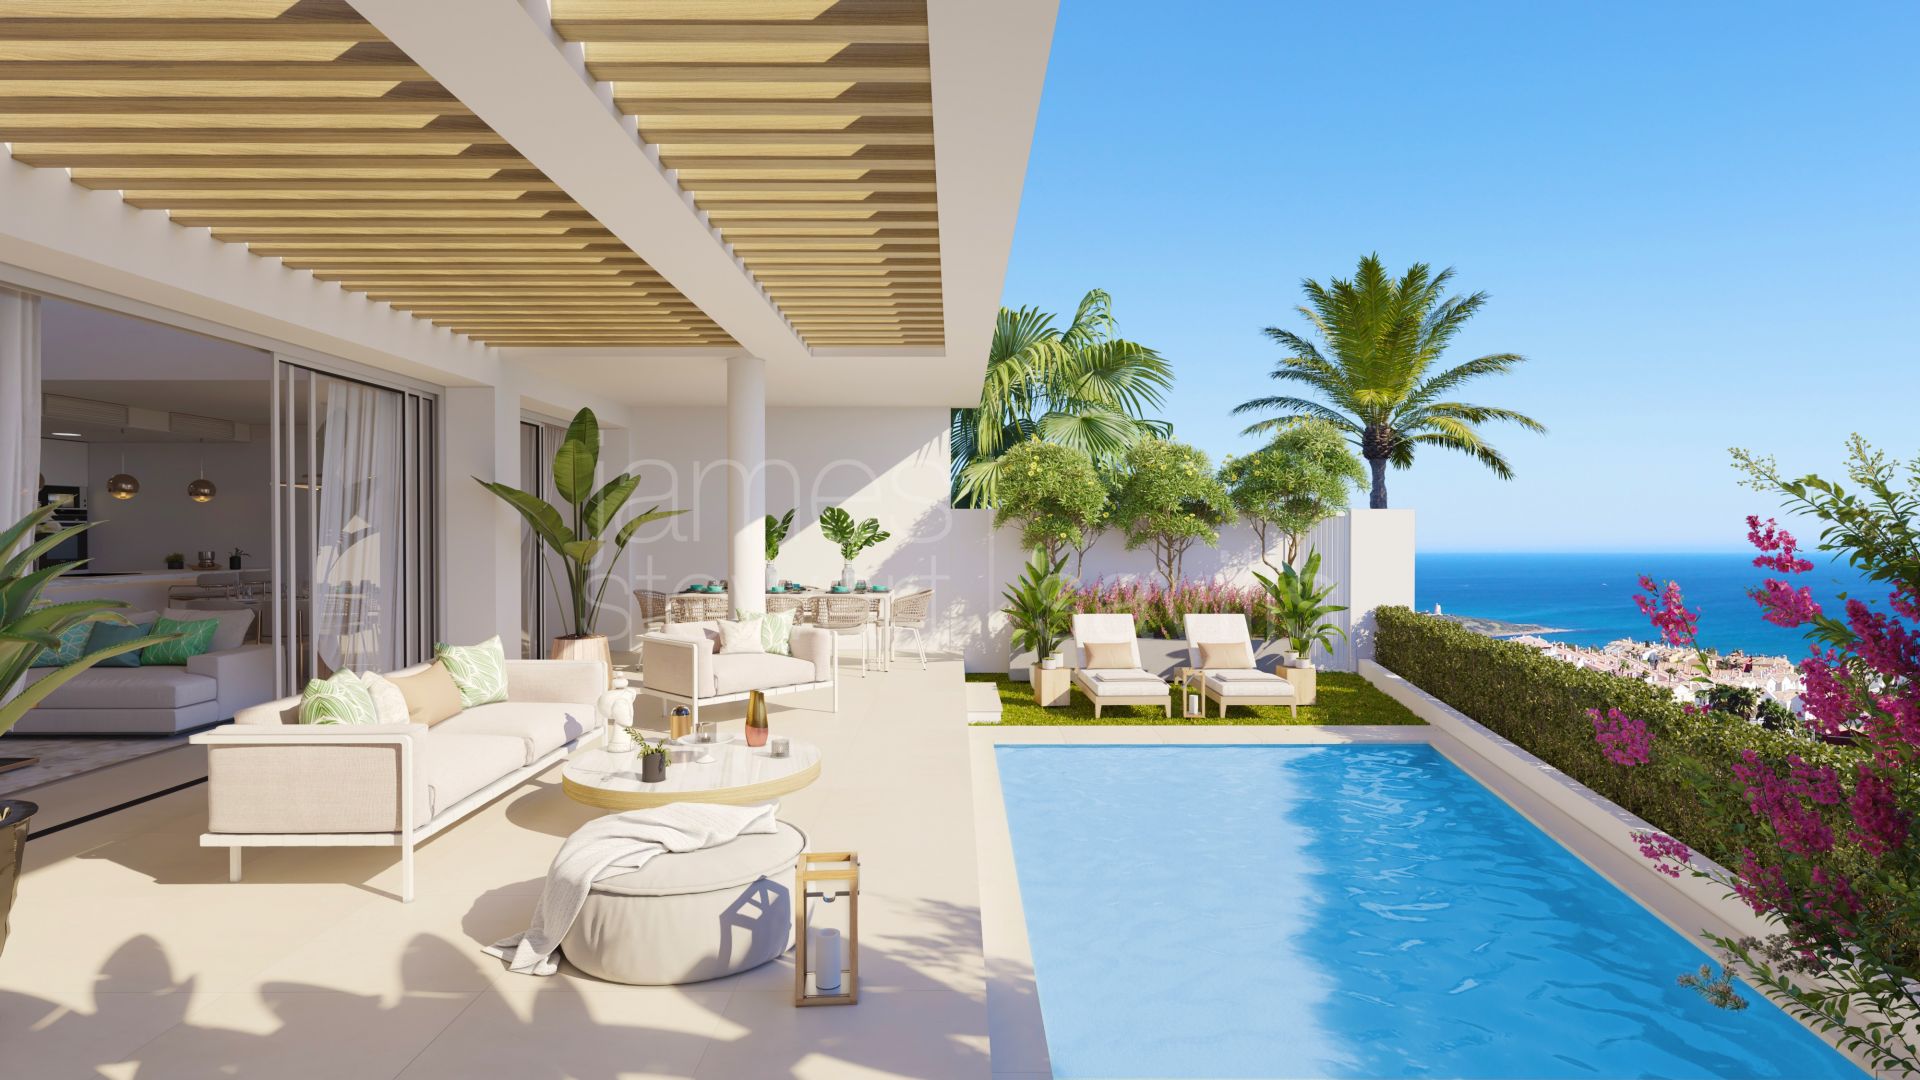 Fabulous Duplexes and Penthouses with sea views under construction in Alcaidesa